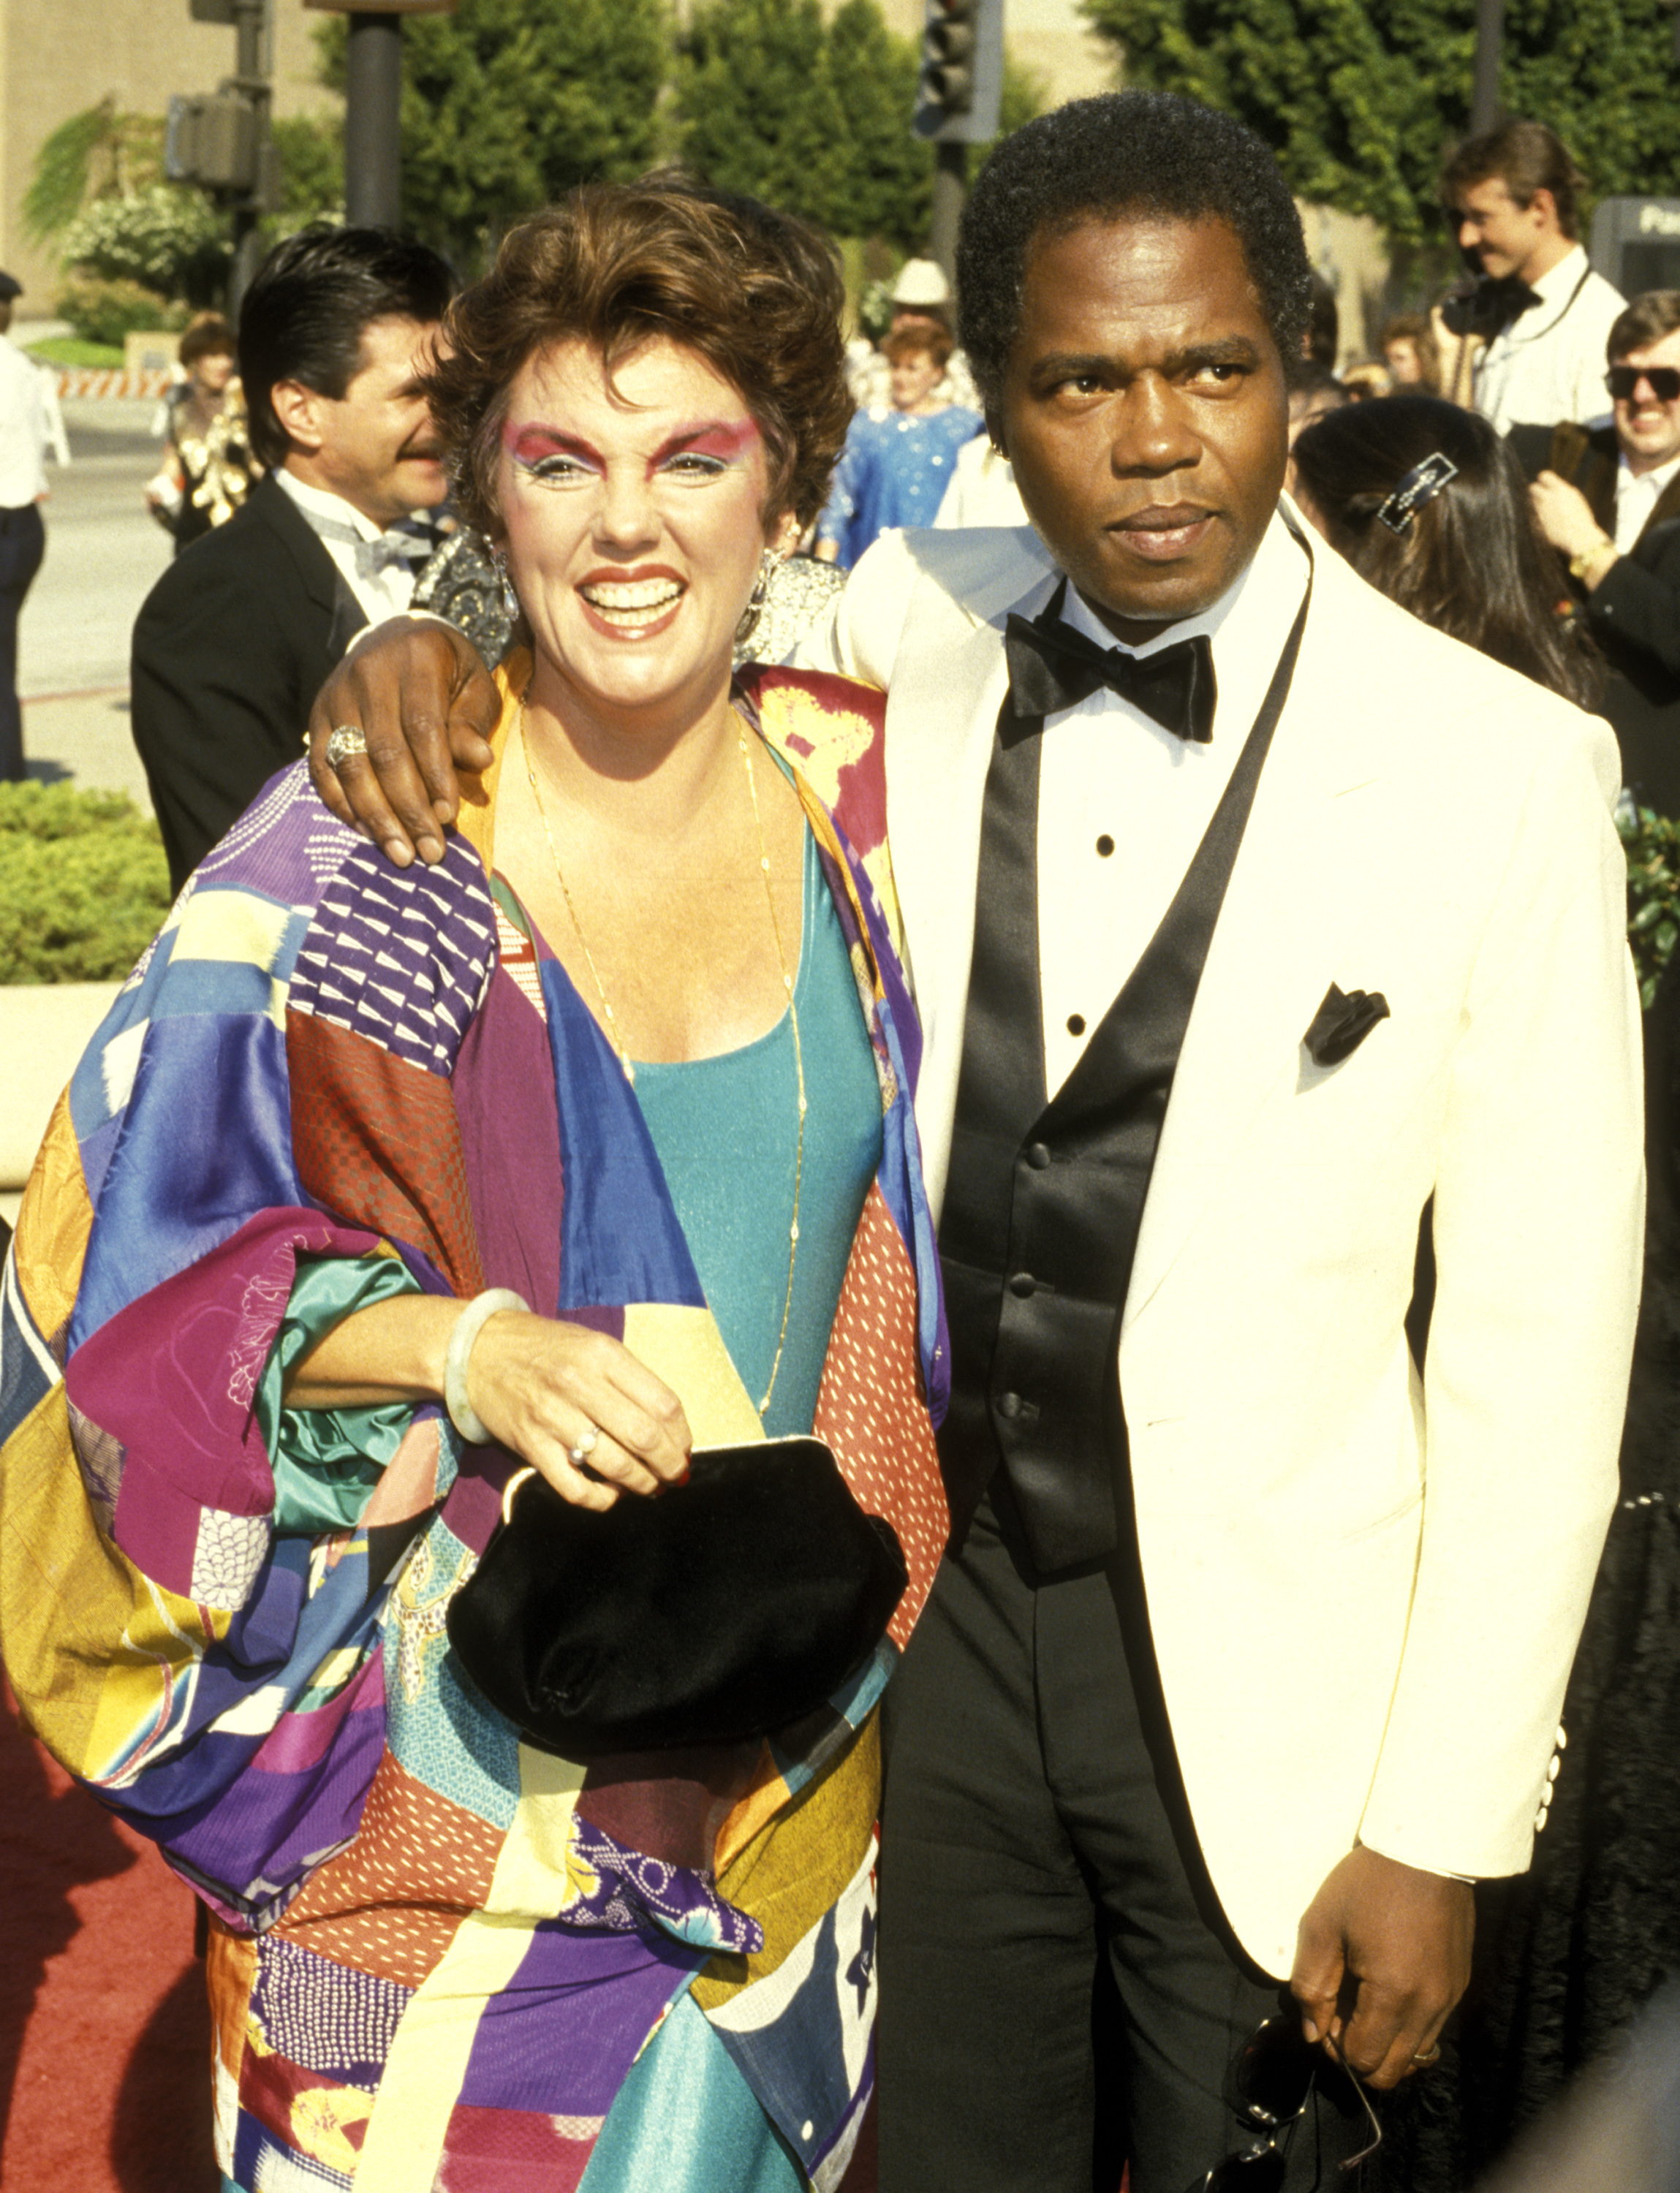 Tyne Daly and Georg Stanford Brown at the 38th Annual Primetime Emmy Awards in 1986. | Source: Getty Images